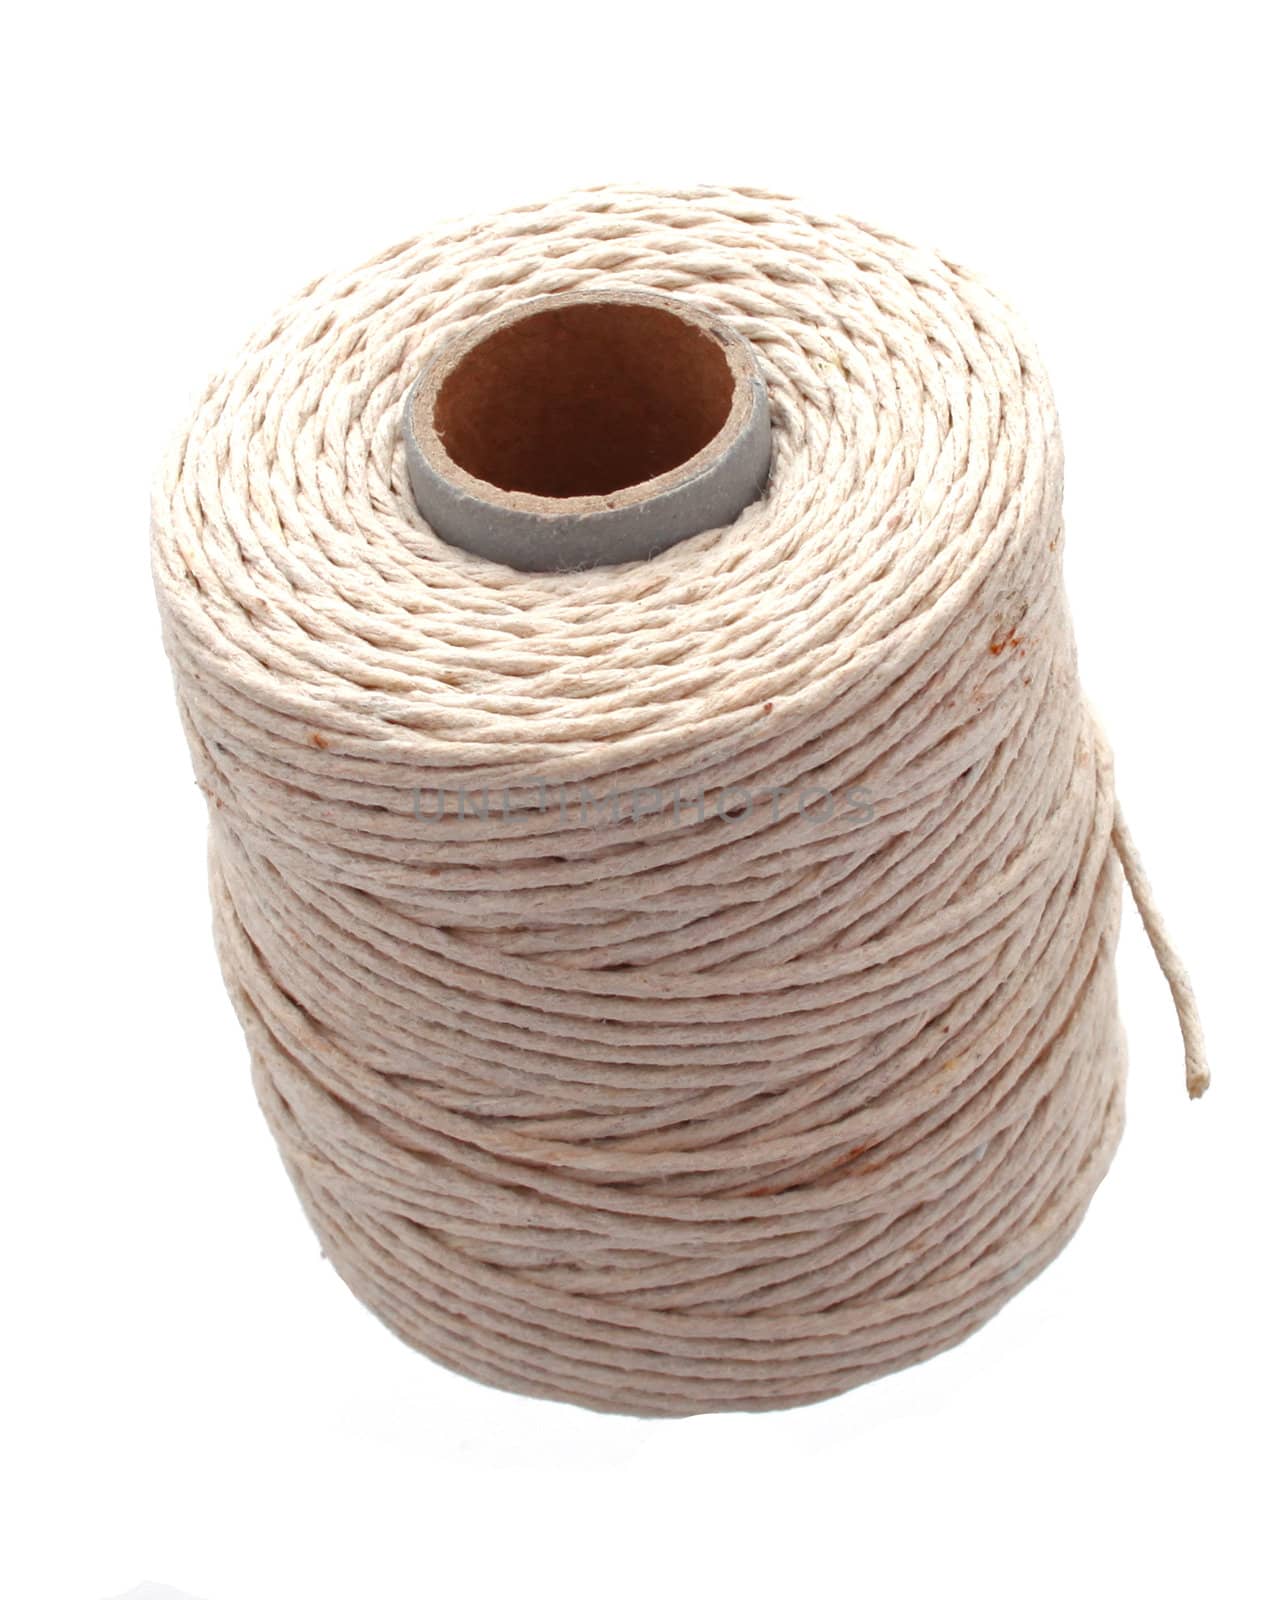 Ball of string or twine on a plain white background.